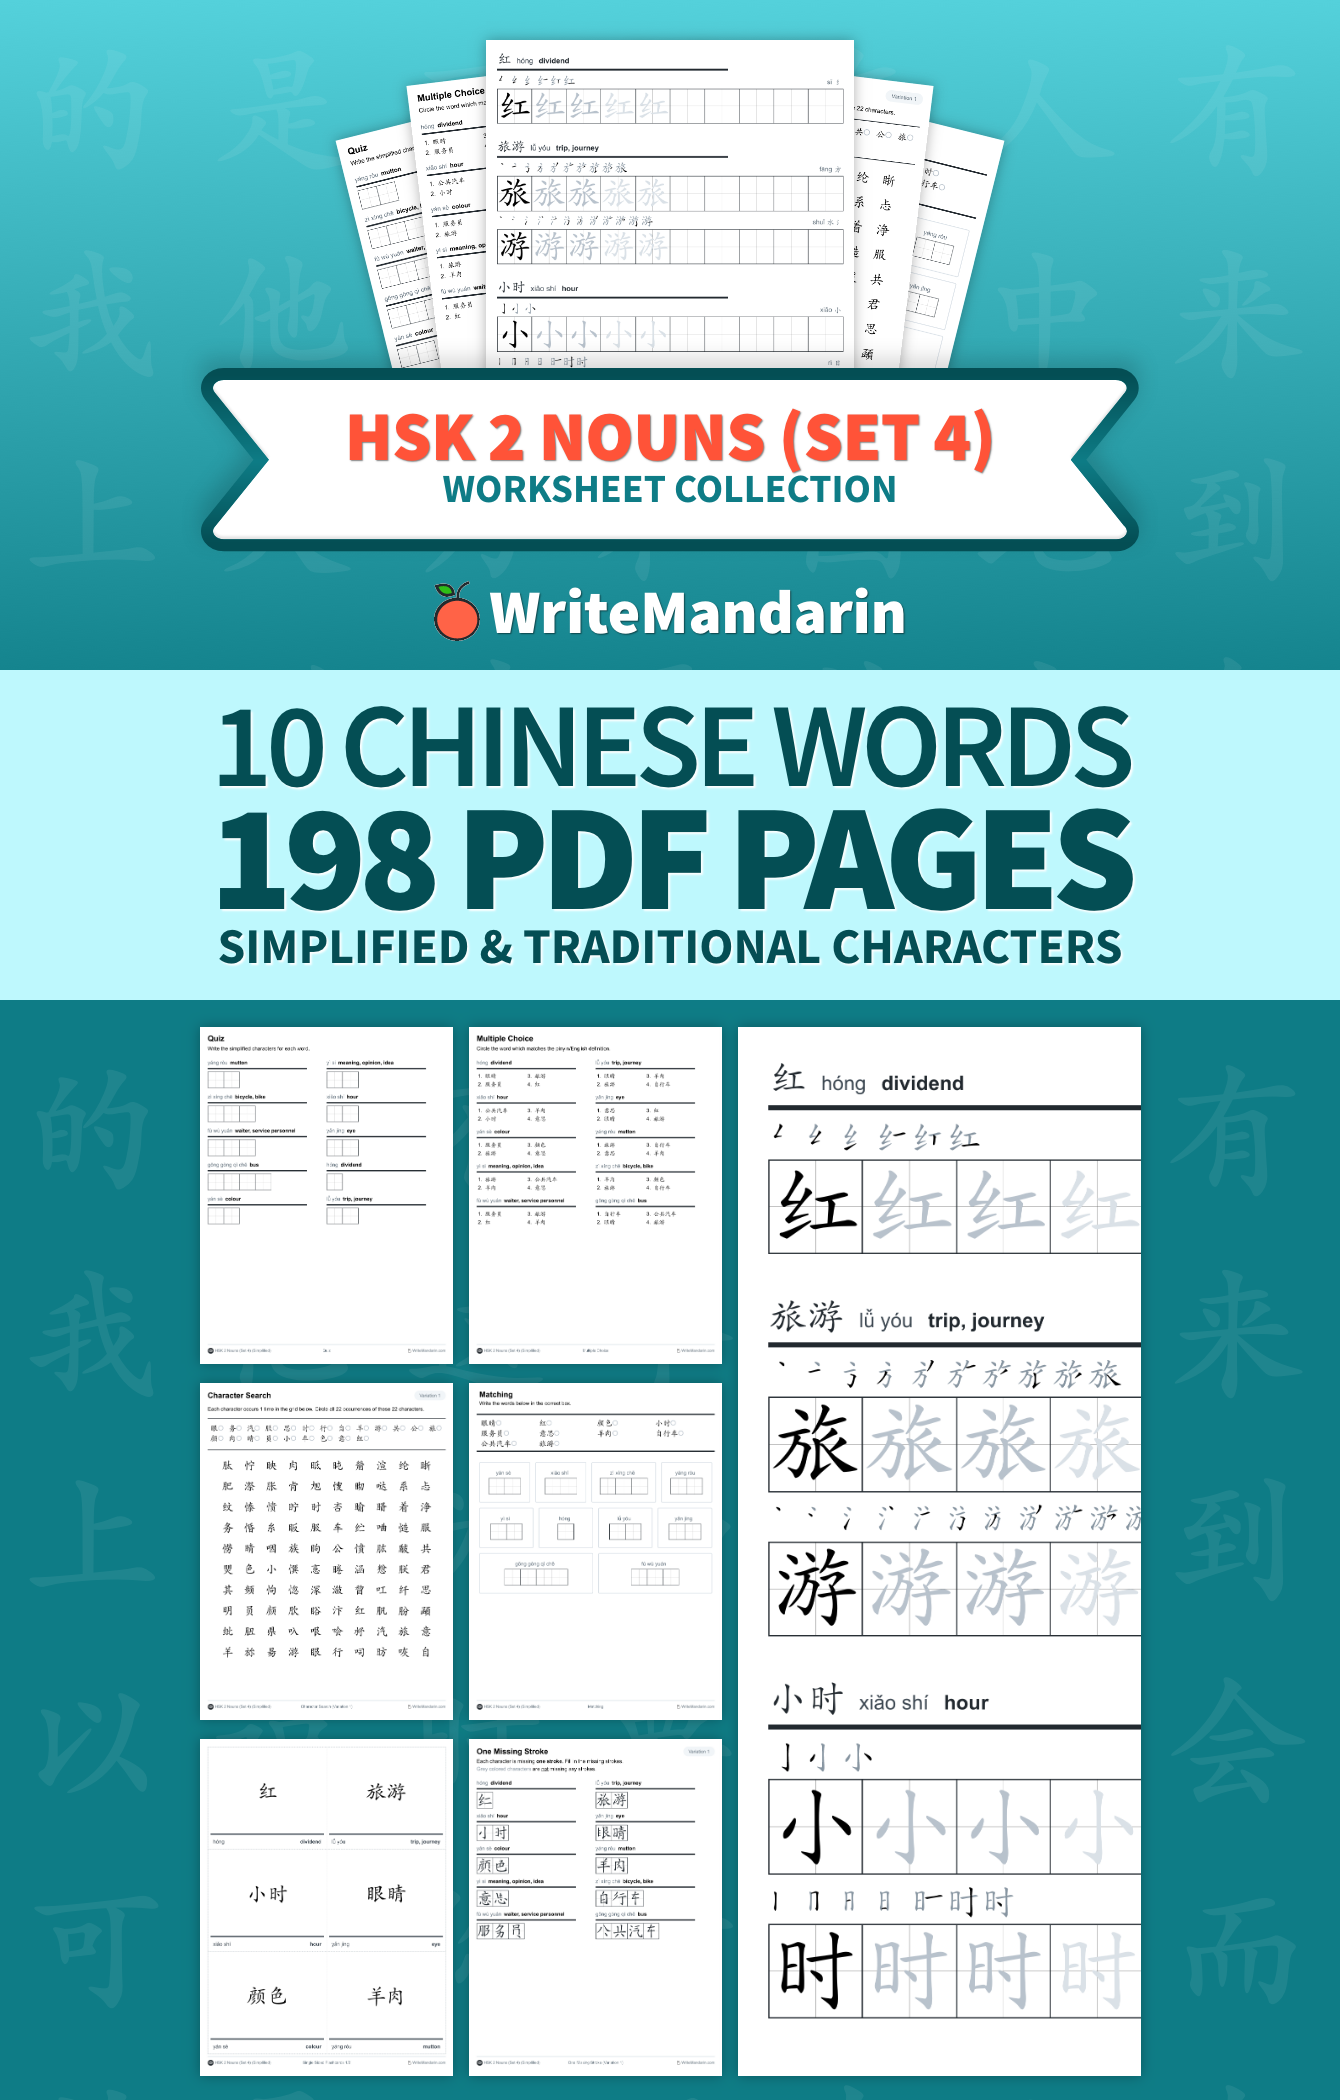 Preview image of HSK 2 Nouns (Set 4) worksheet collection